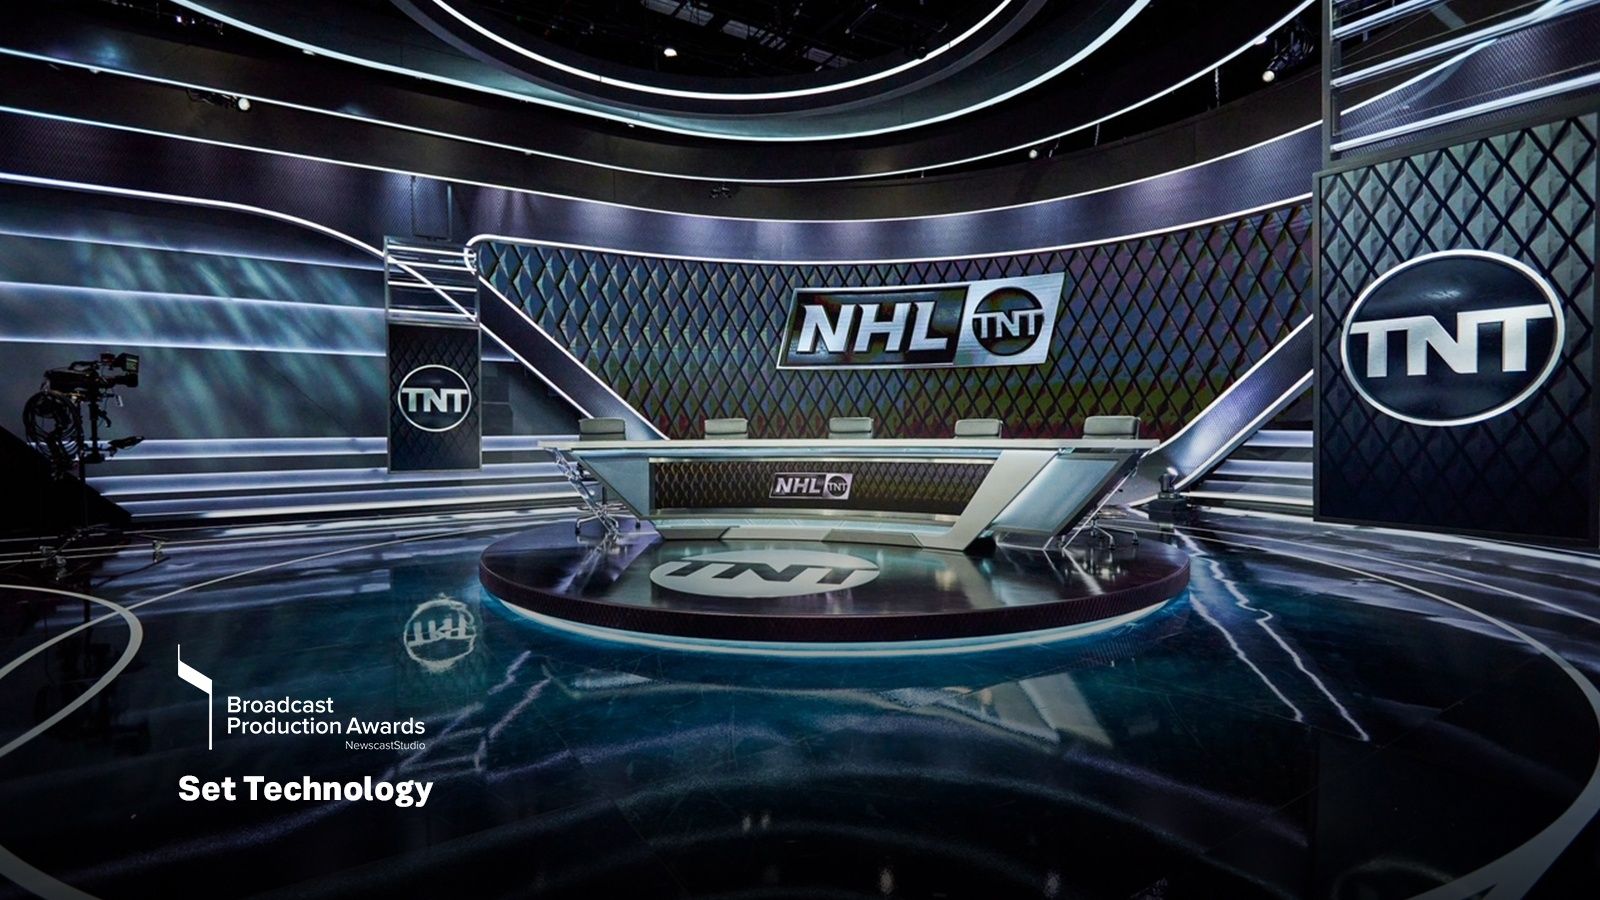 The NHL on TNT